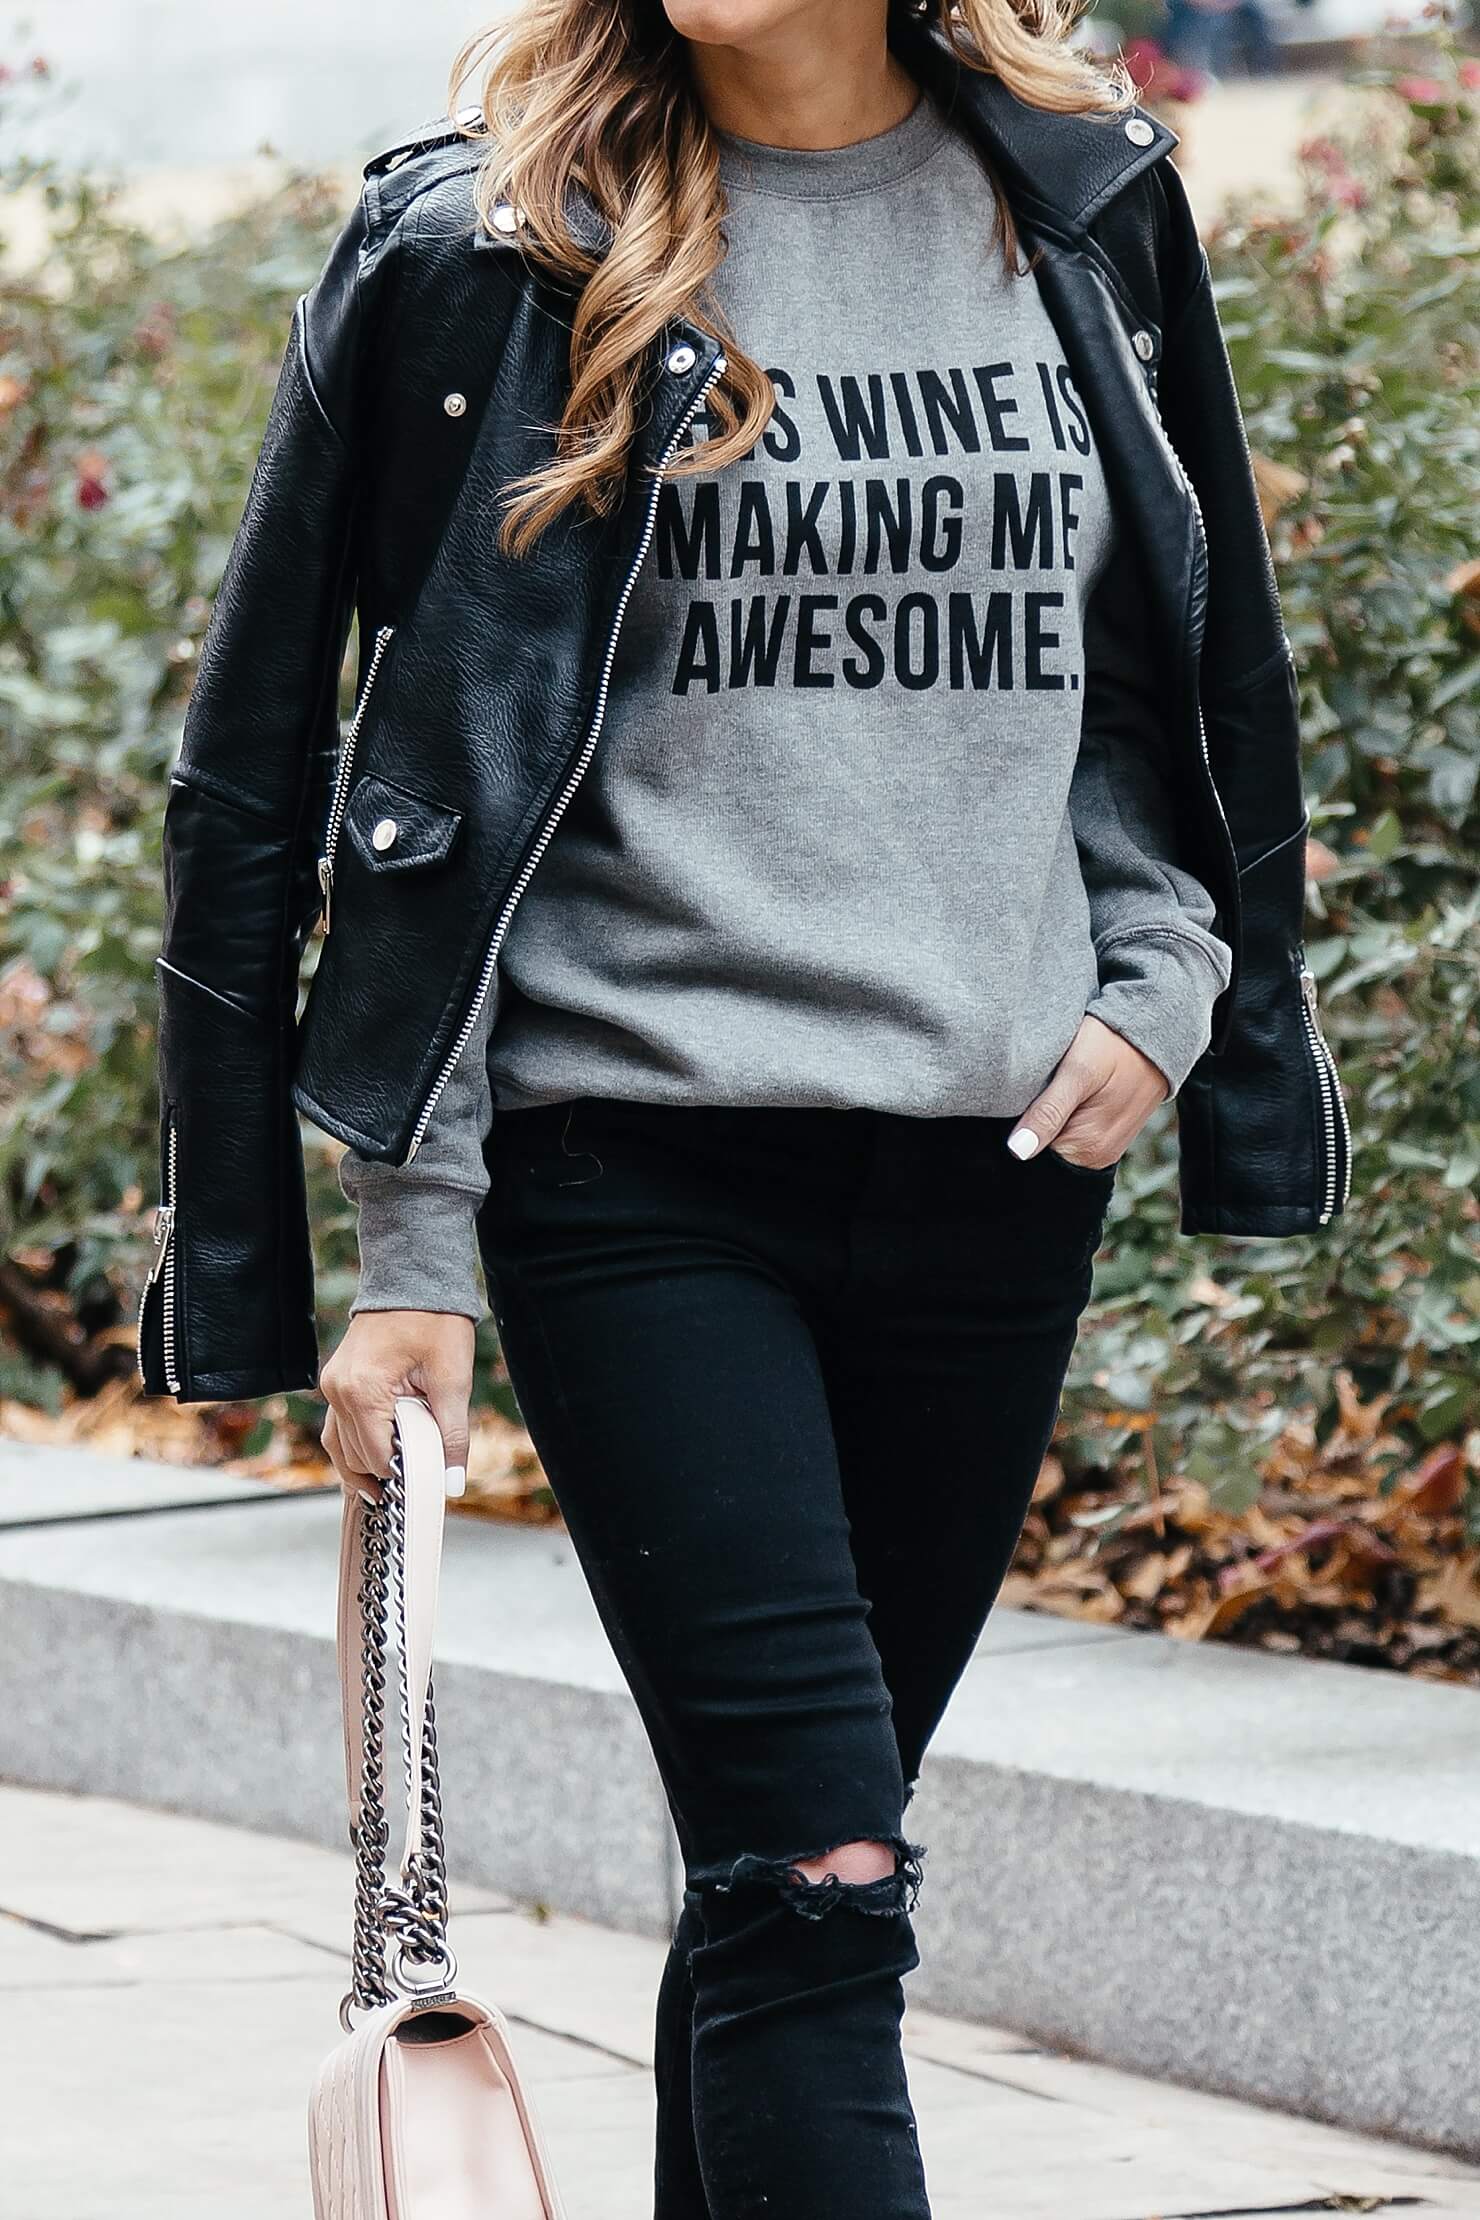 how to be awesome, leather jacket outfit